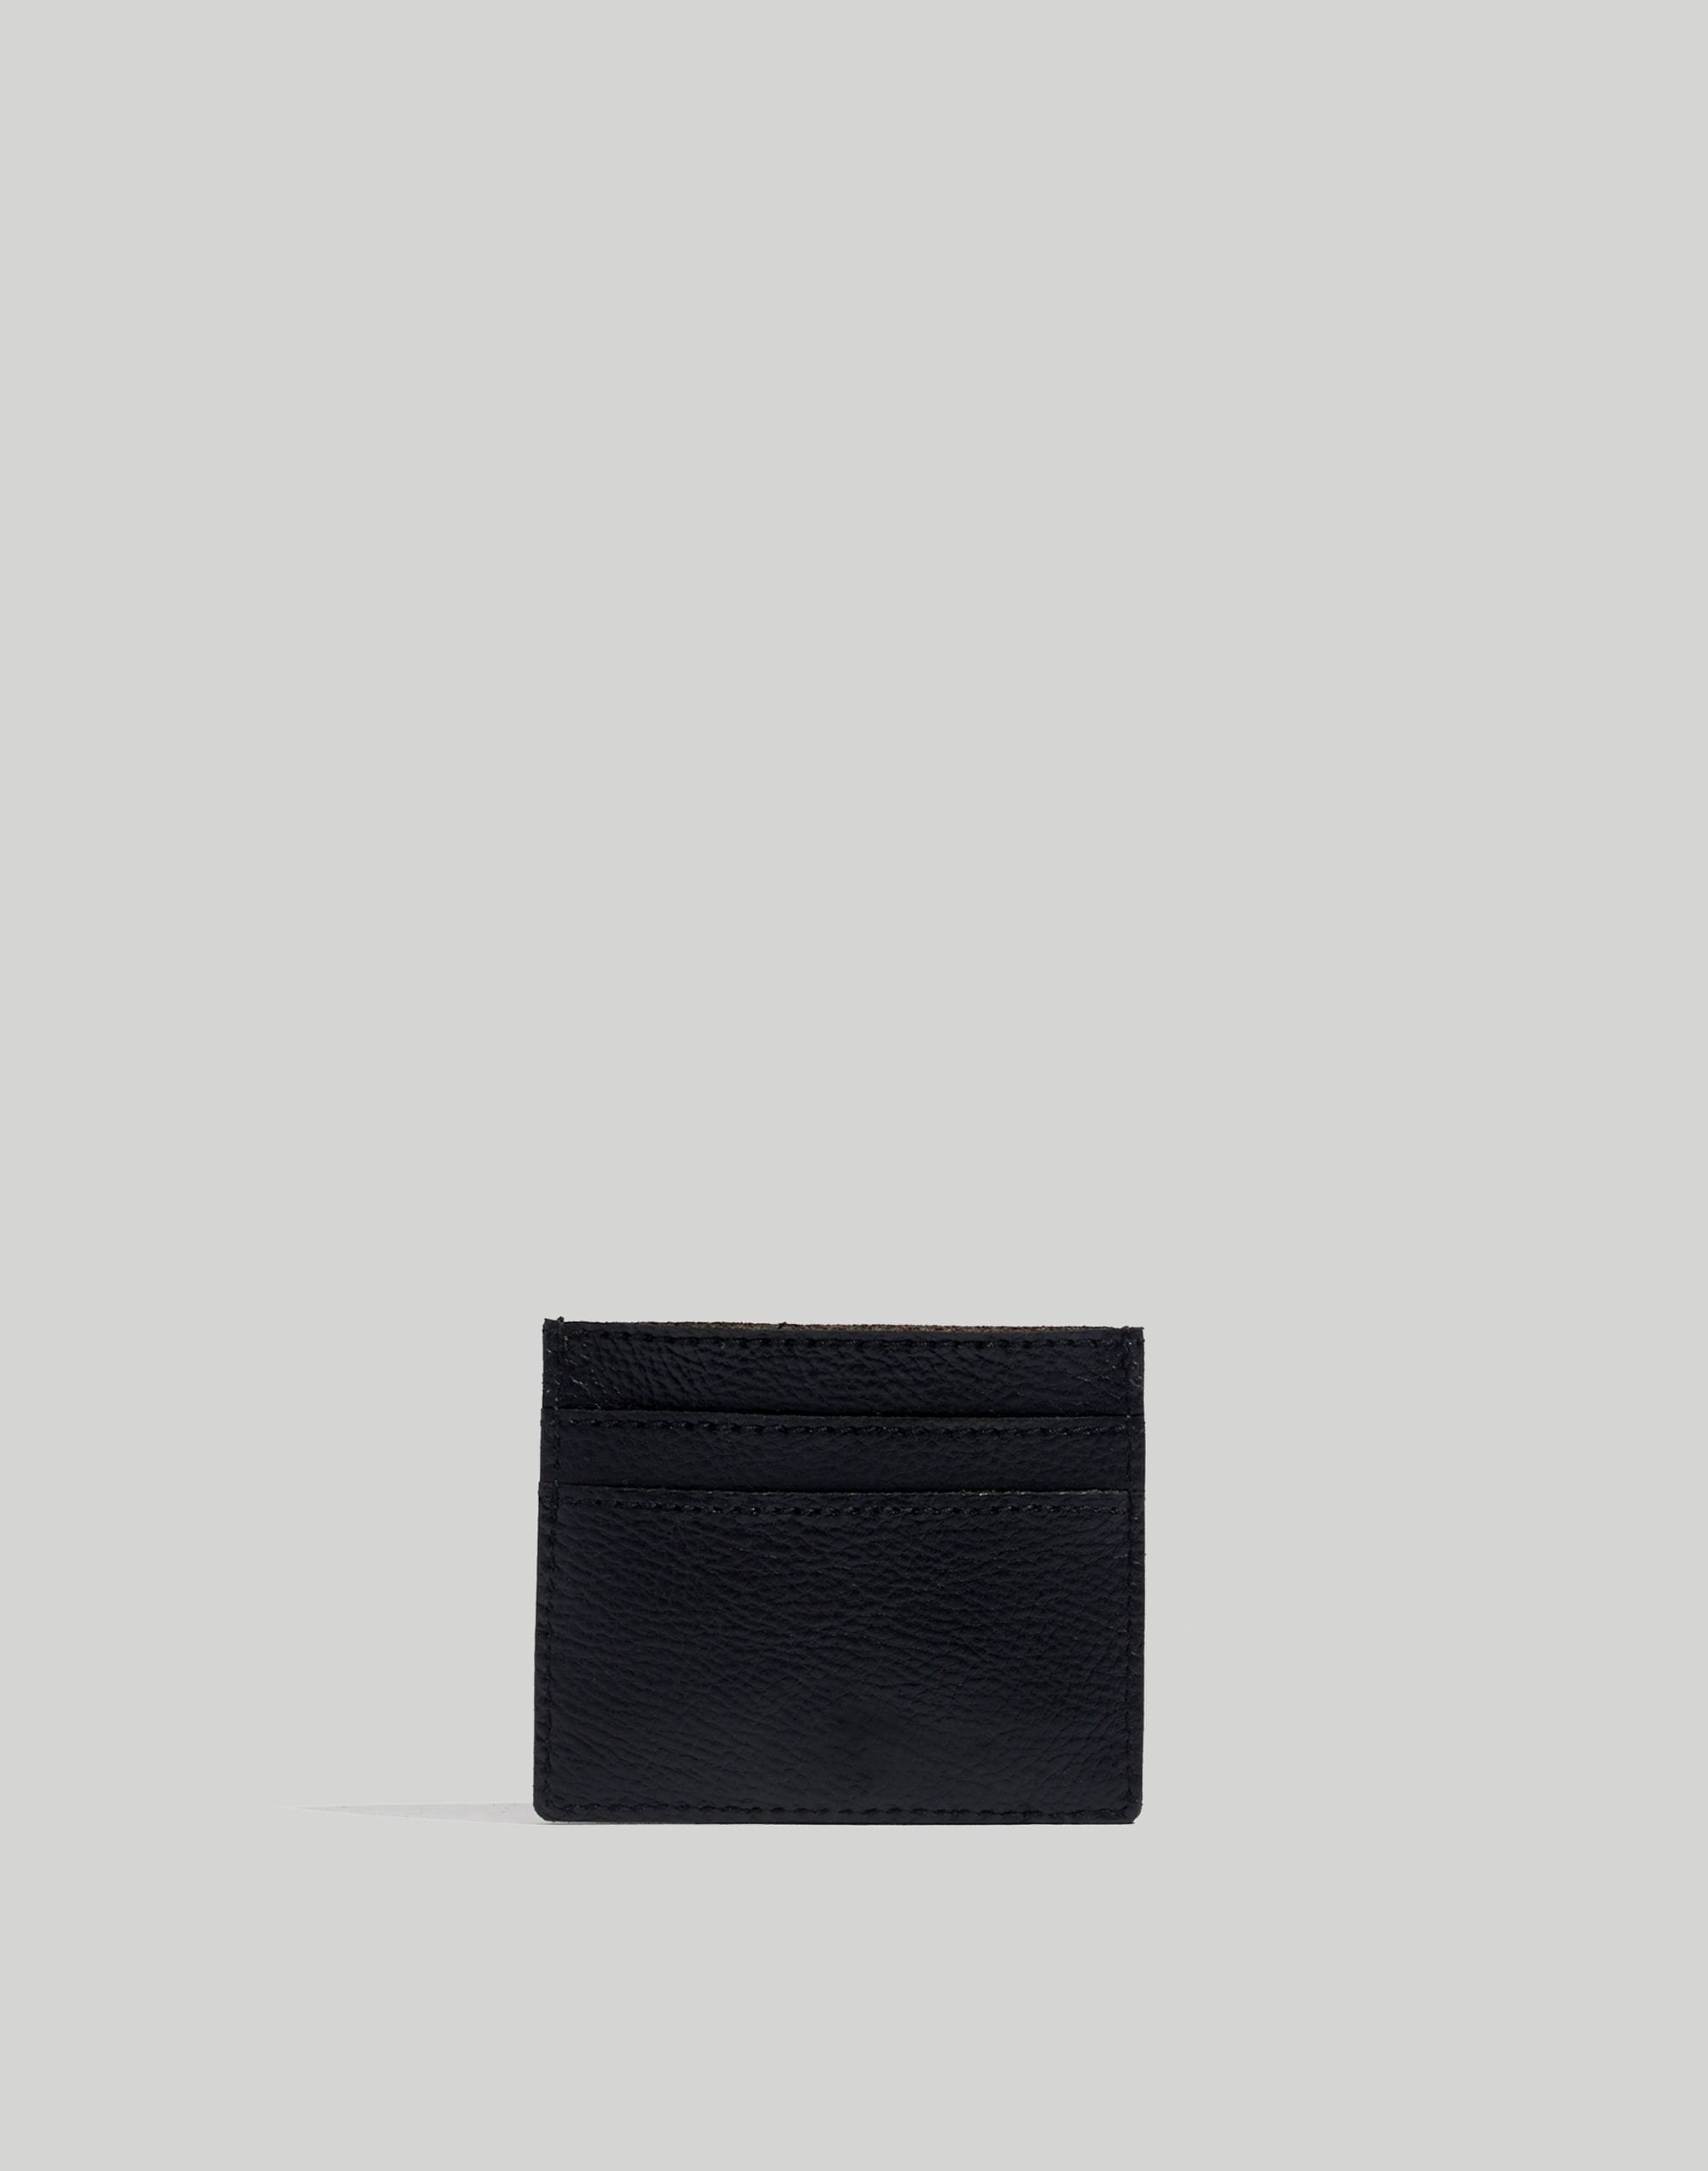 Creative Series Small Wallet Classic Black Business Card Holder